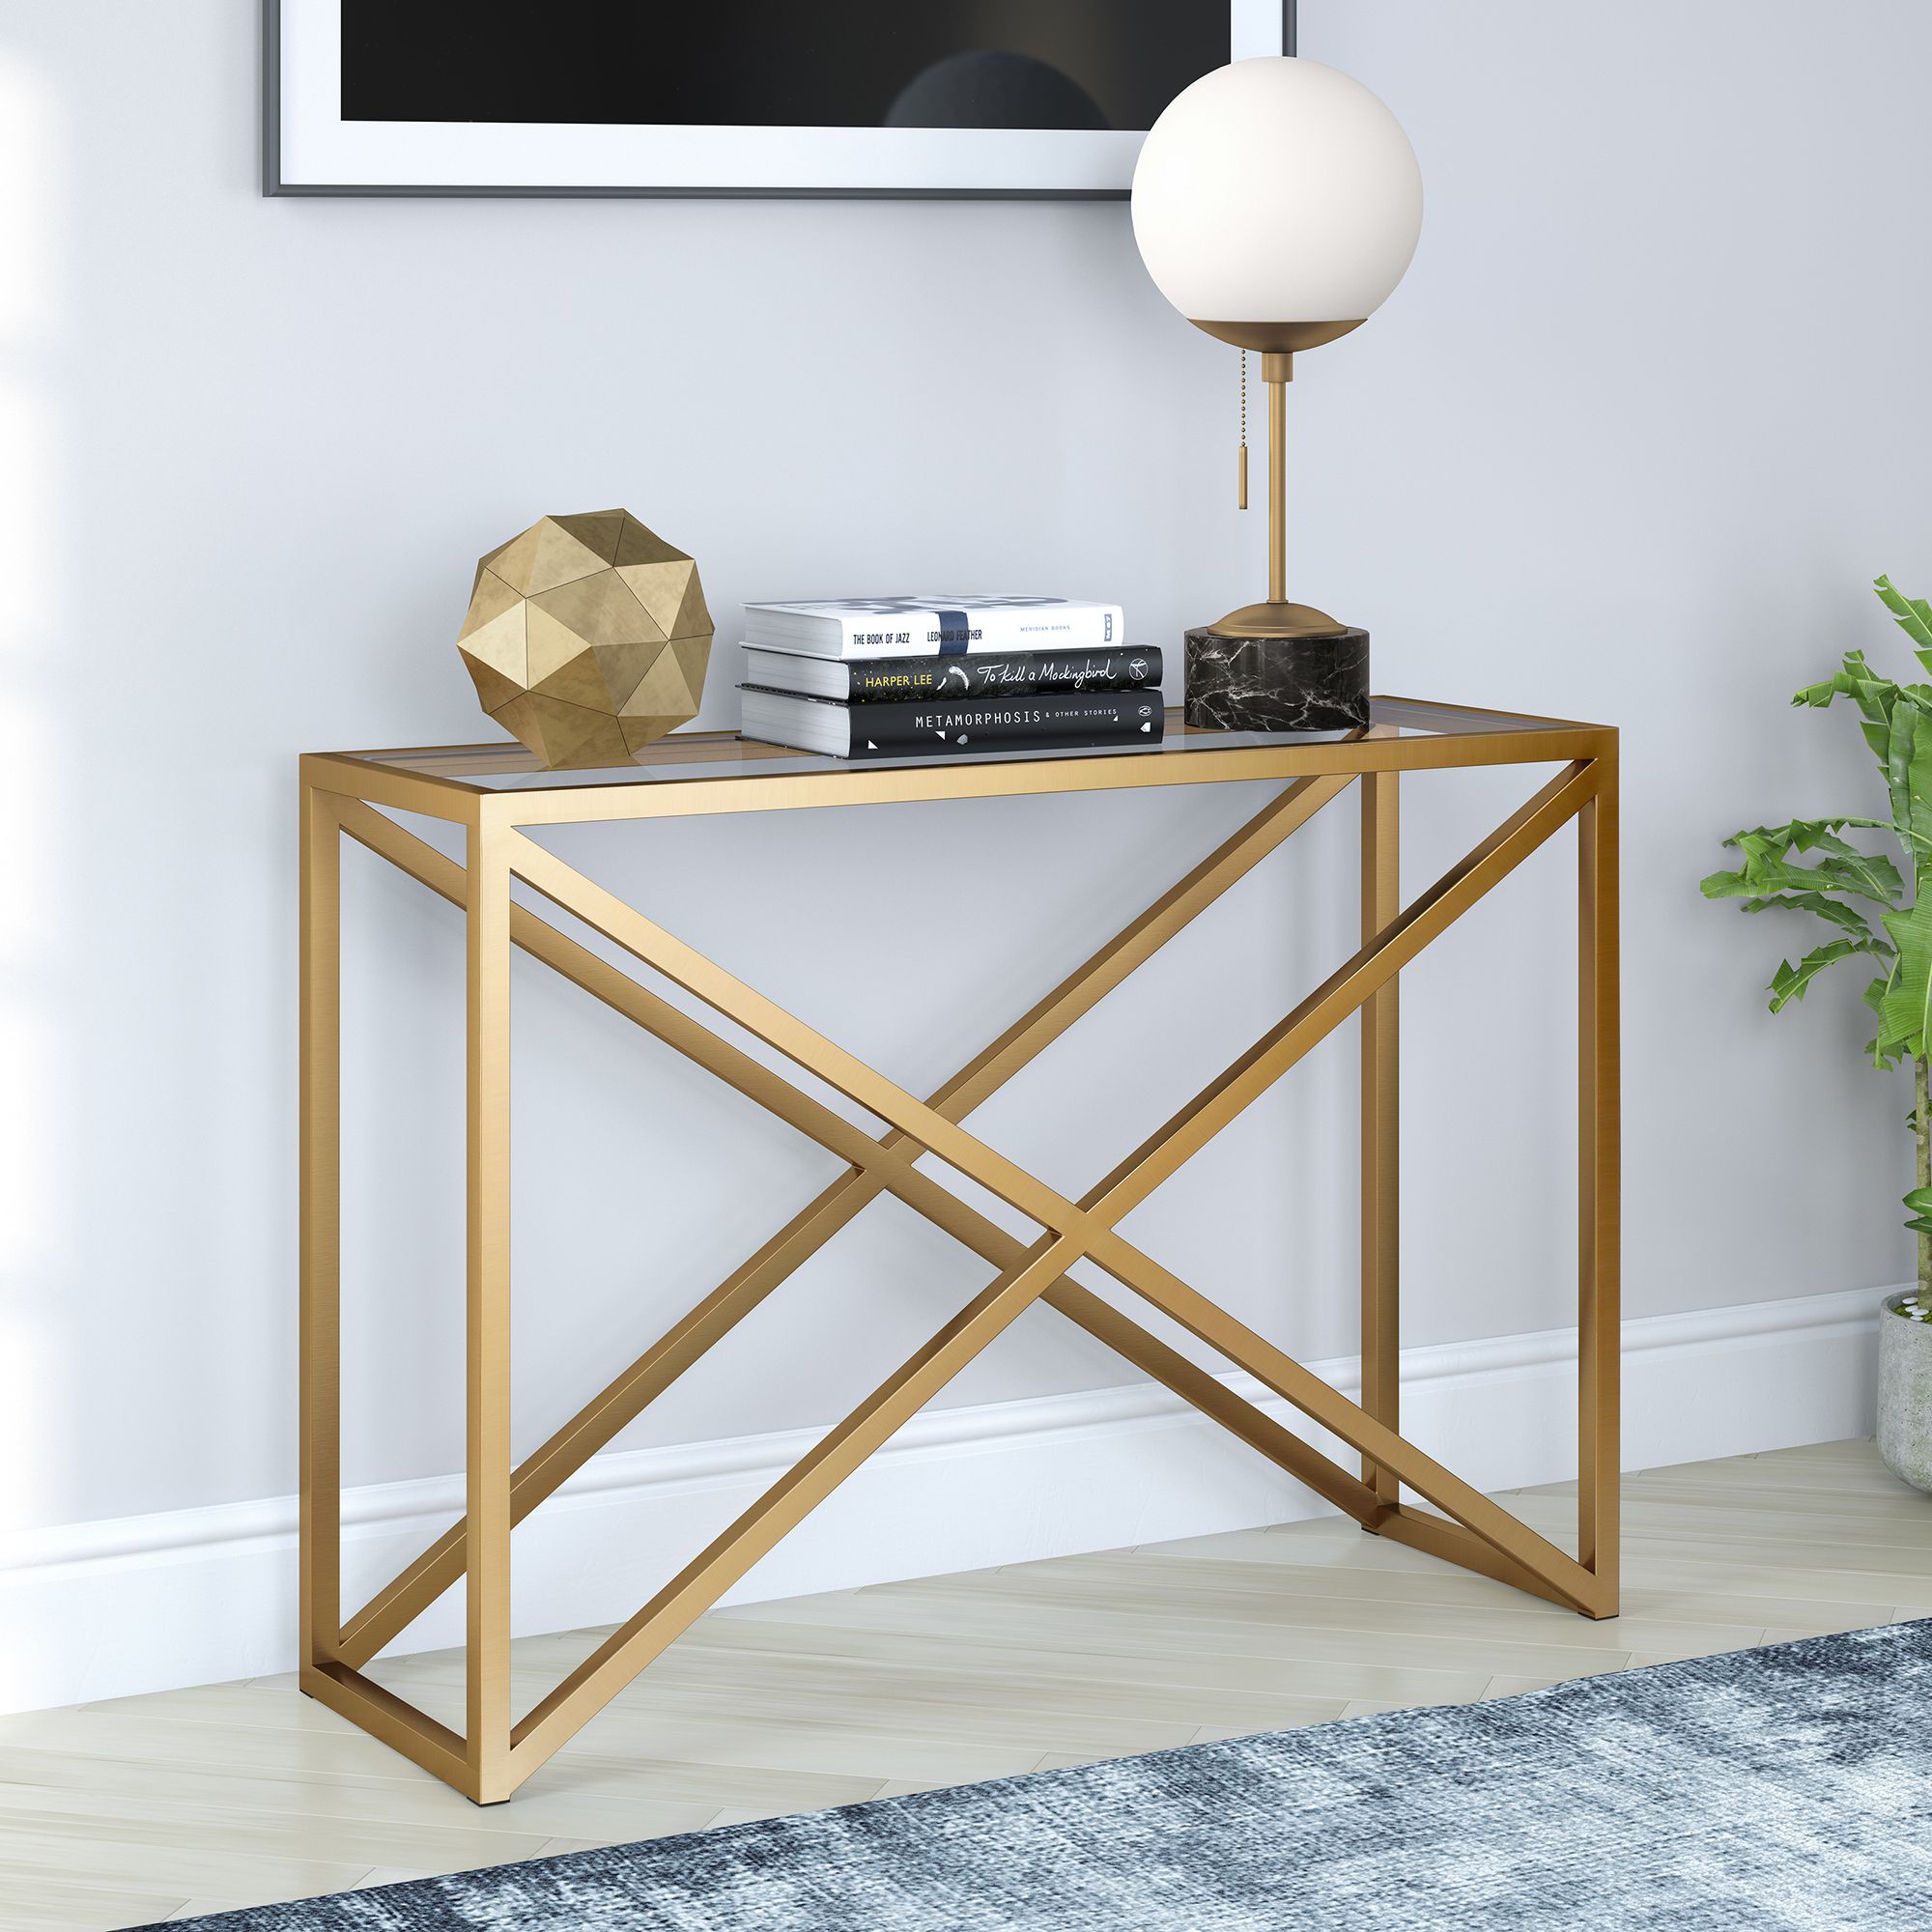 Evelyn&zoe Console Table With Glass Top – Walmart Inside Glass And Pewter Console Tables (View 5 of 20)